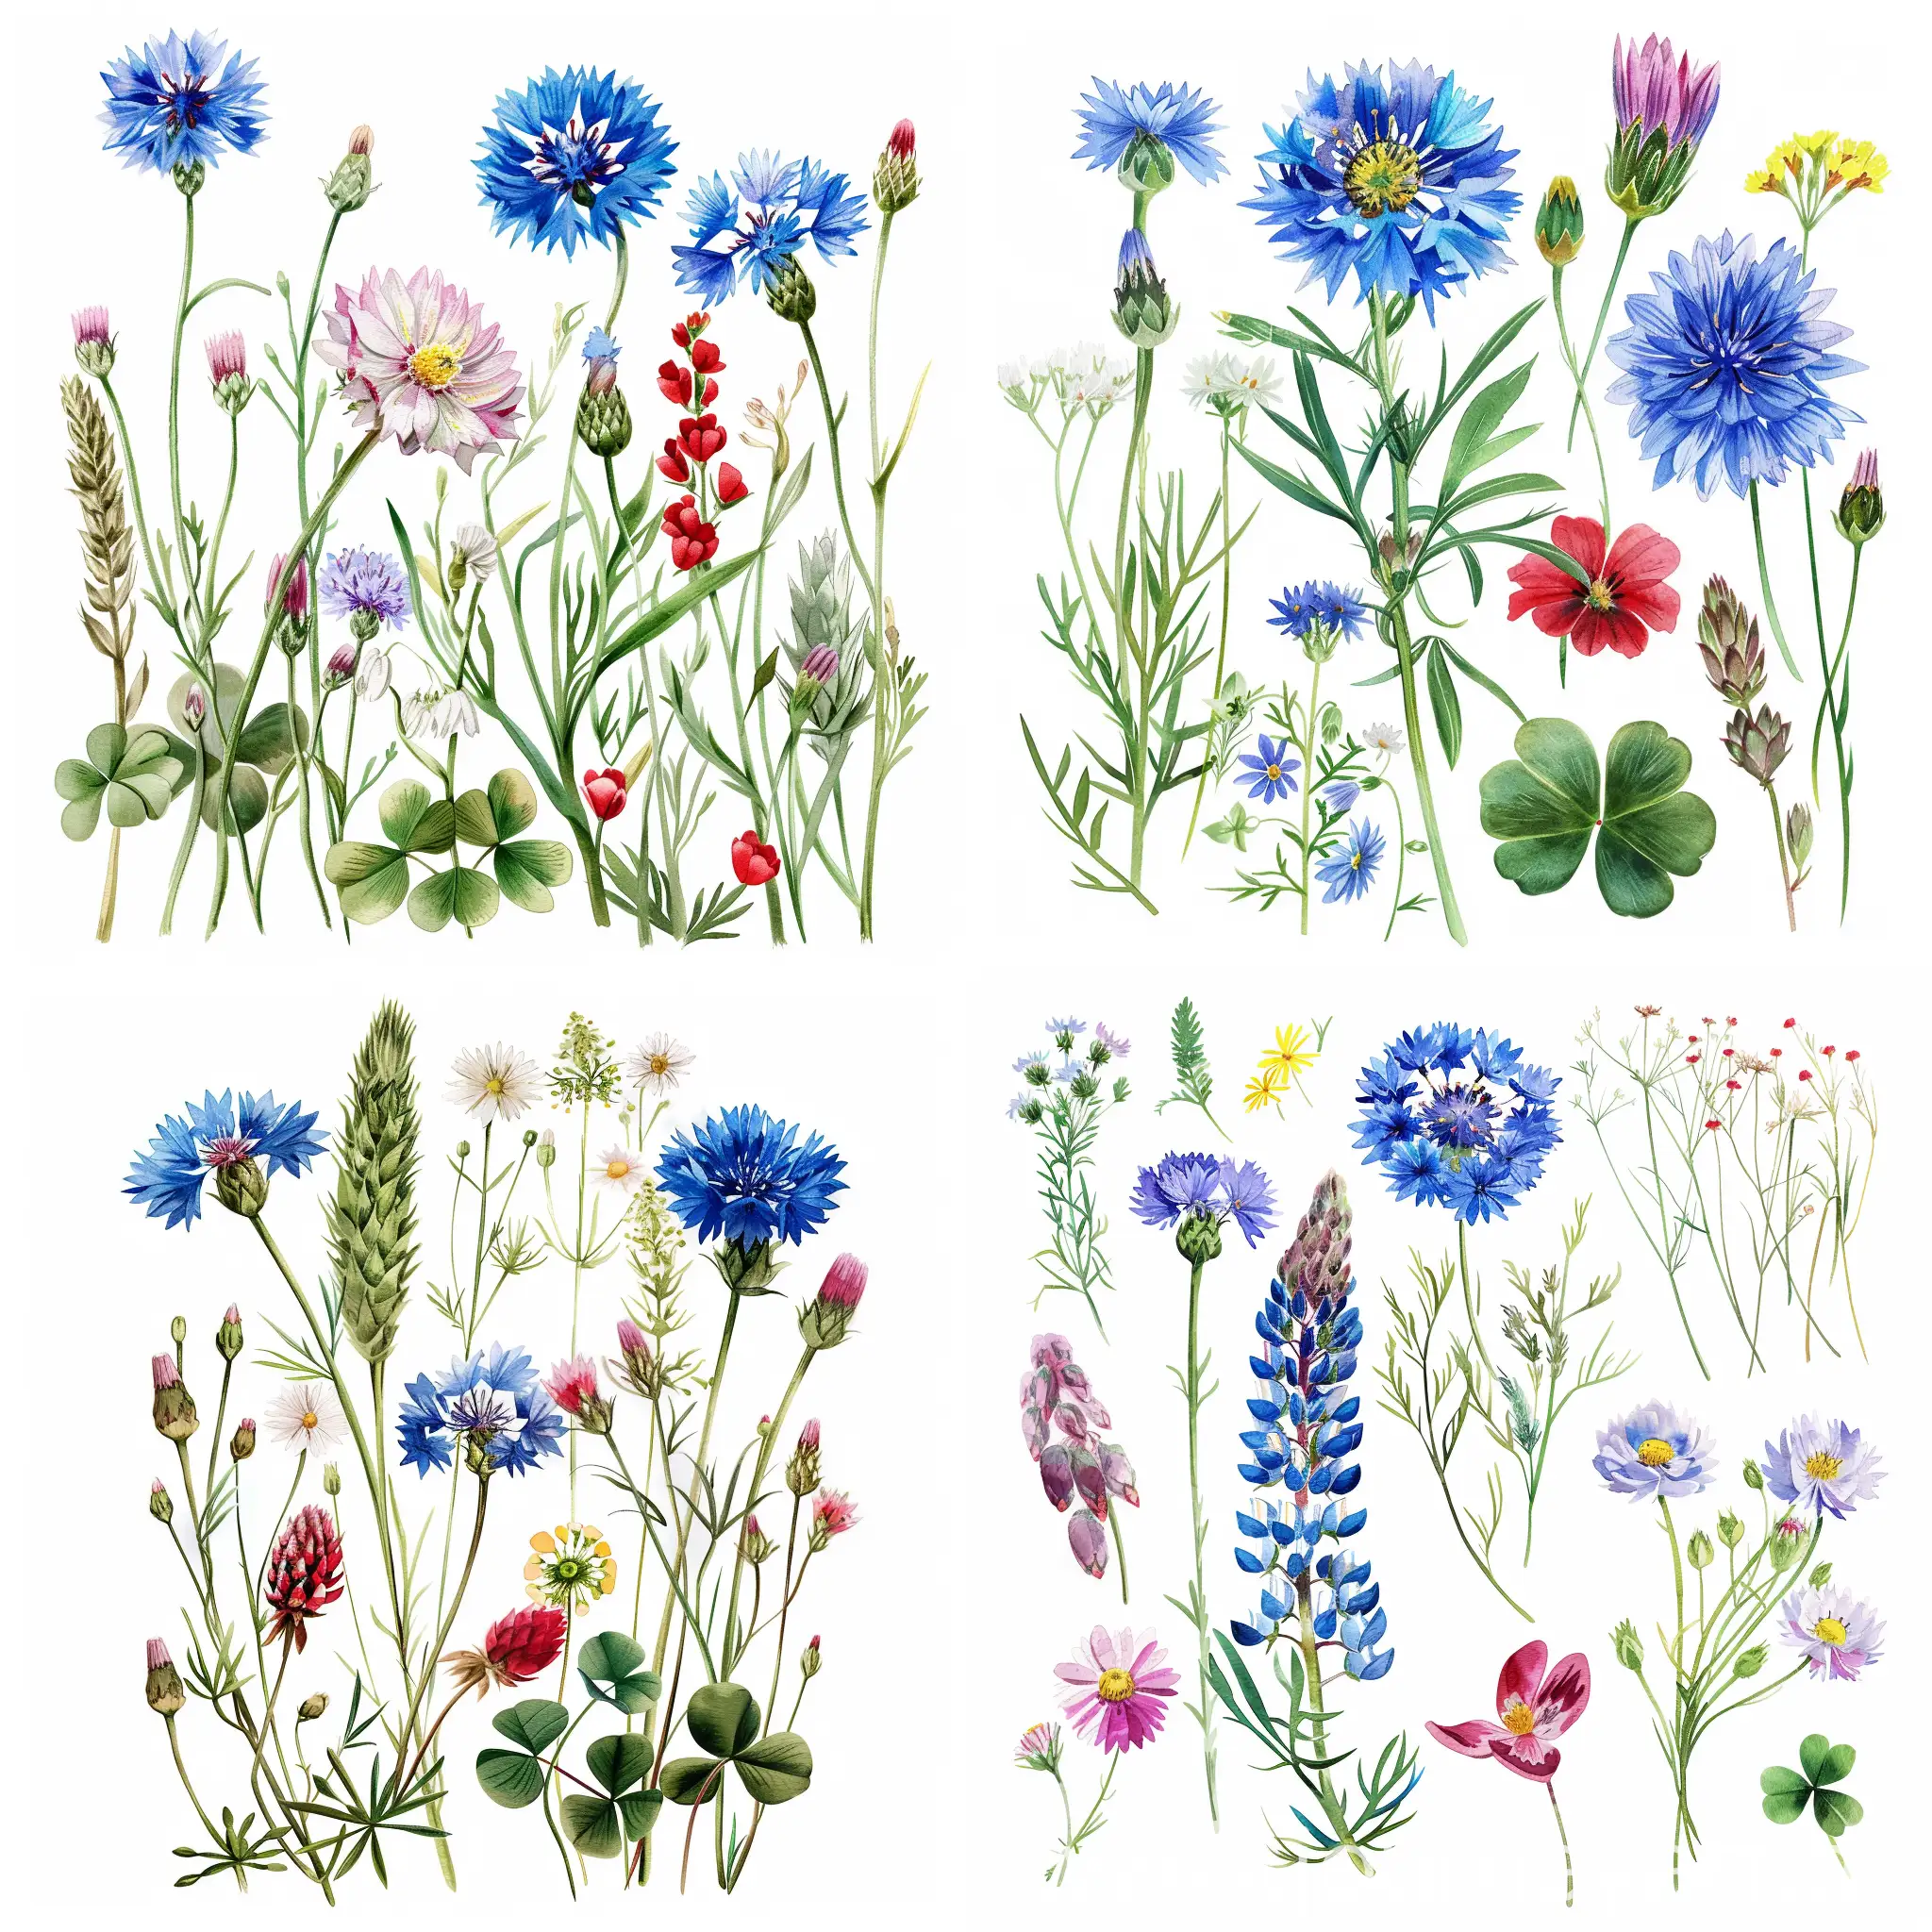 watercolor wildflowers, cornflower, daisy, cow parsley, buttercup, red clover, wood cranesbill, soft handpainting, detailed, on white background